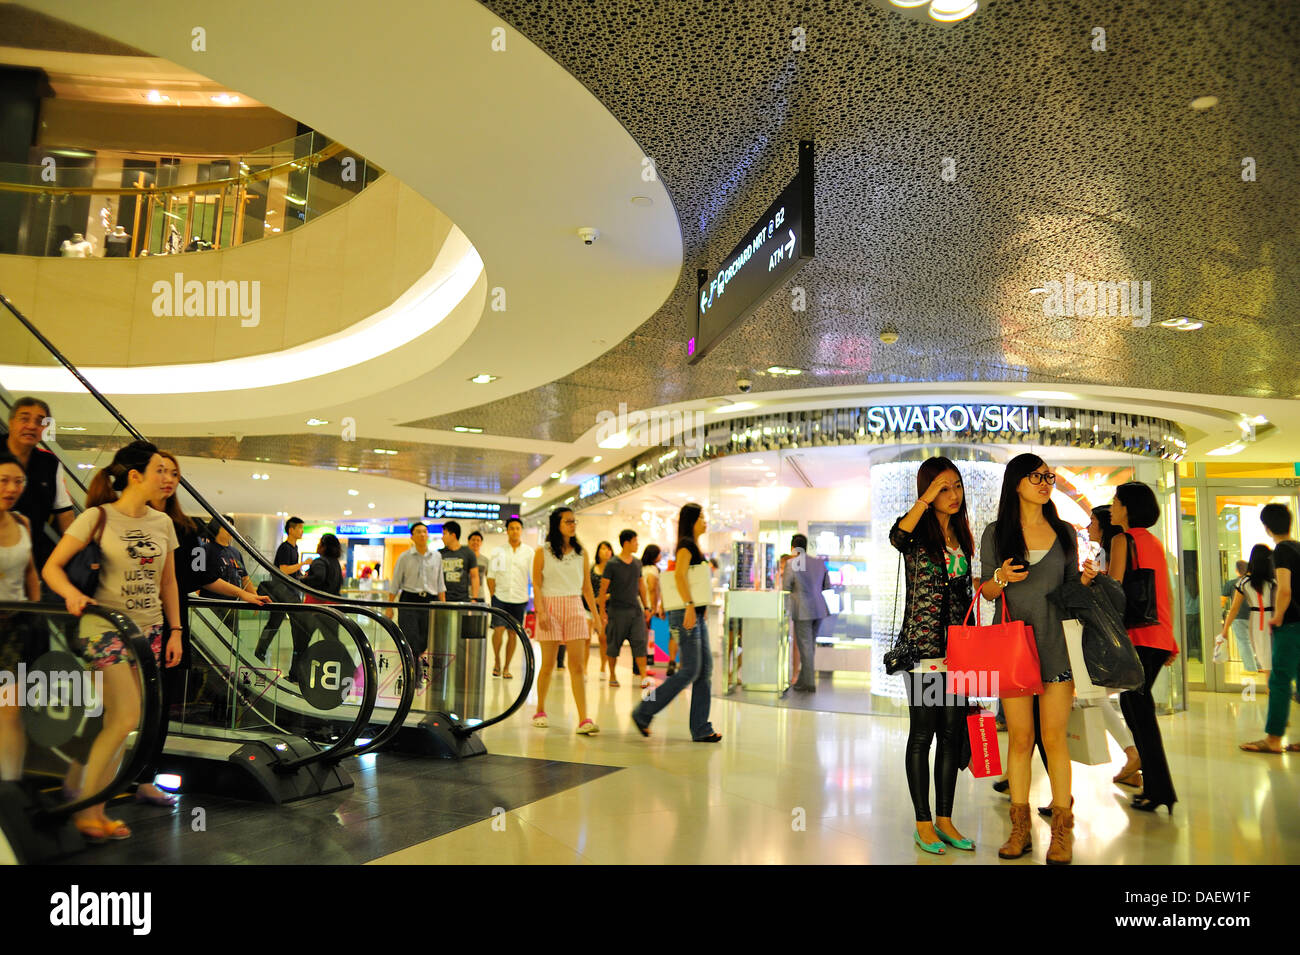 Shoppers Orchard Road ION Mall Singapore Stock Photo